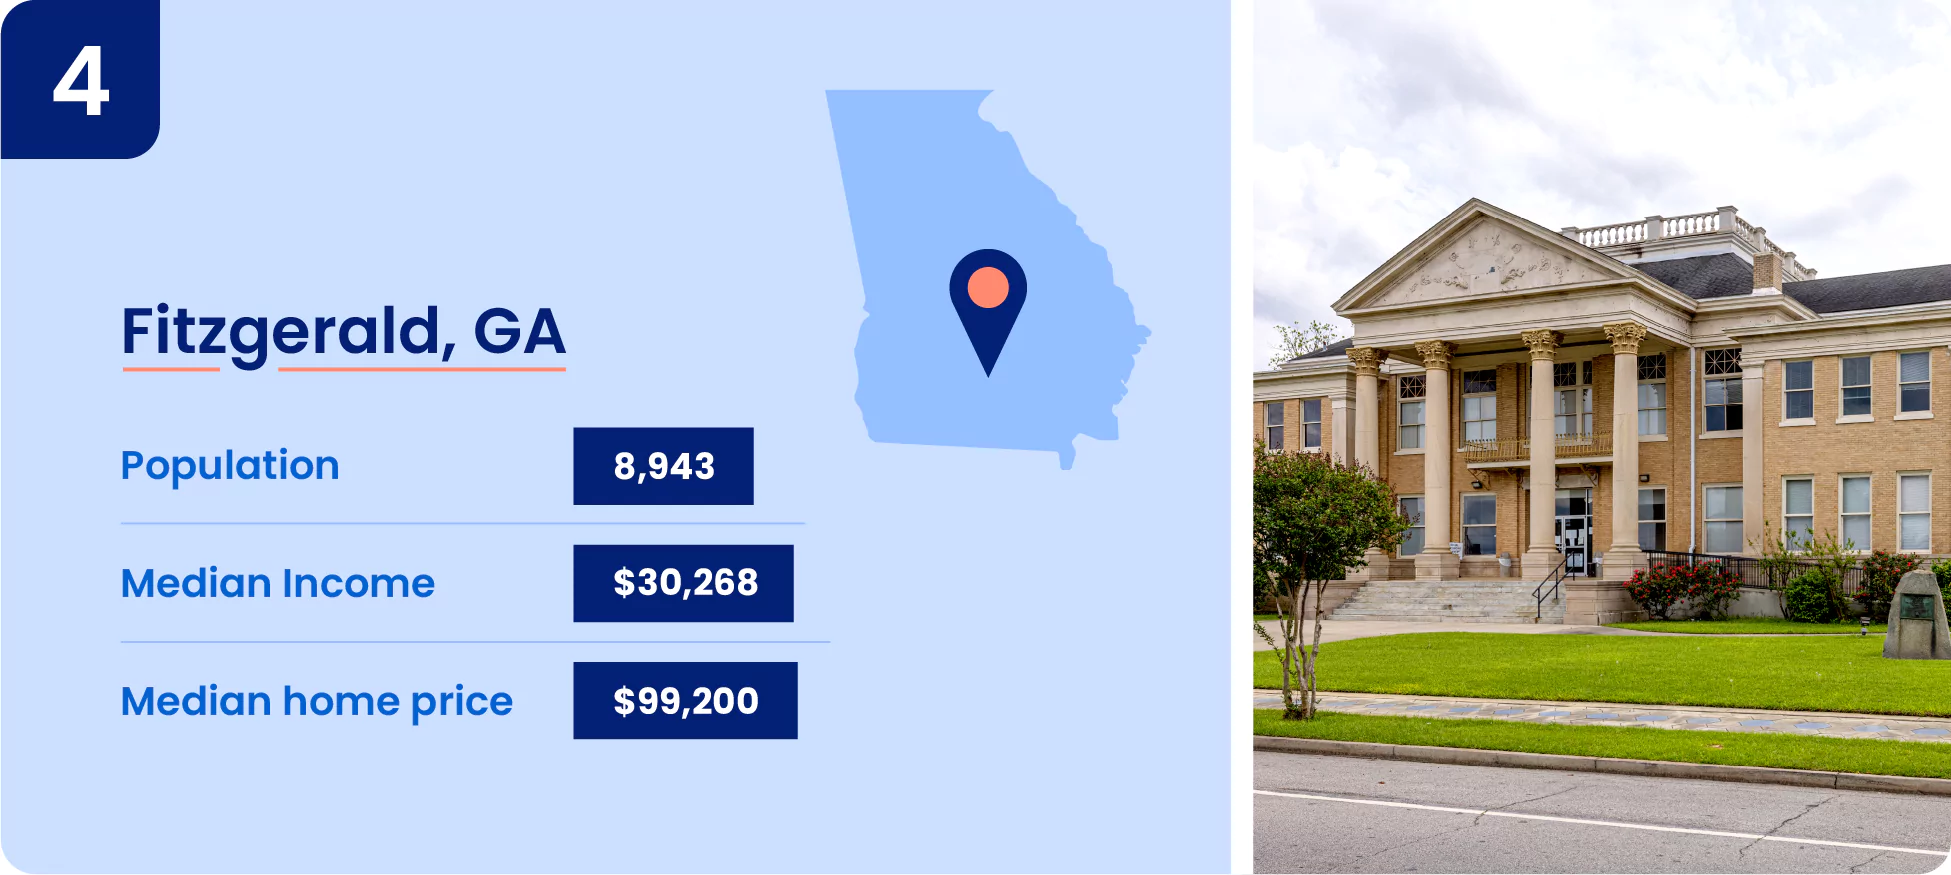 Image shows key information about one of the cheapest place to live in Georgia, the city of Fitzgerald.